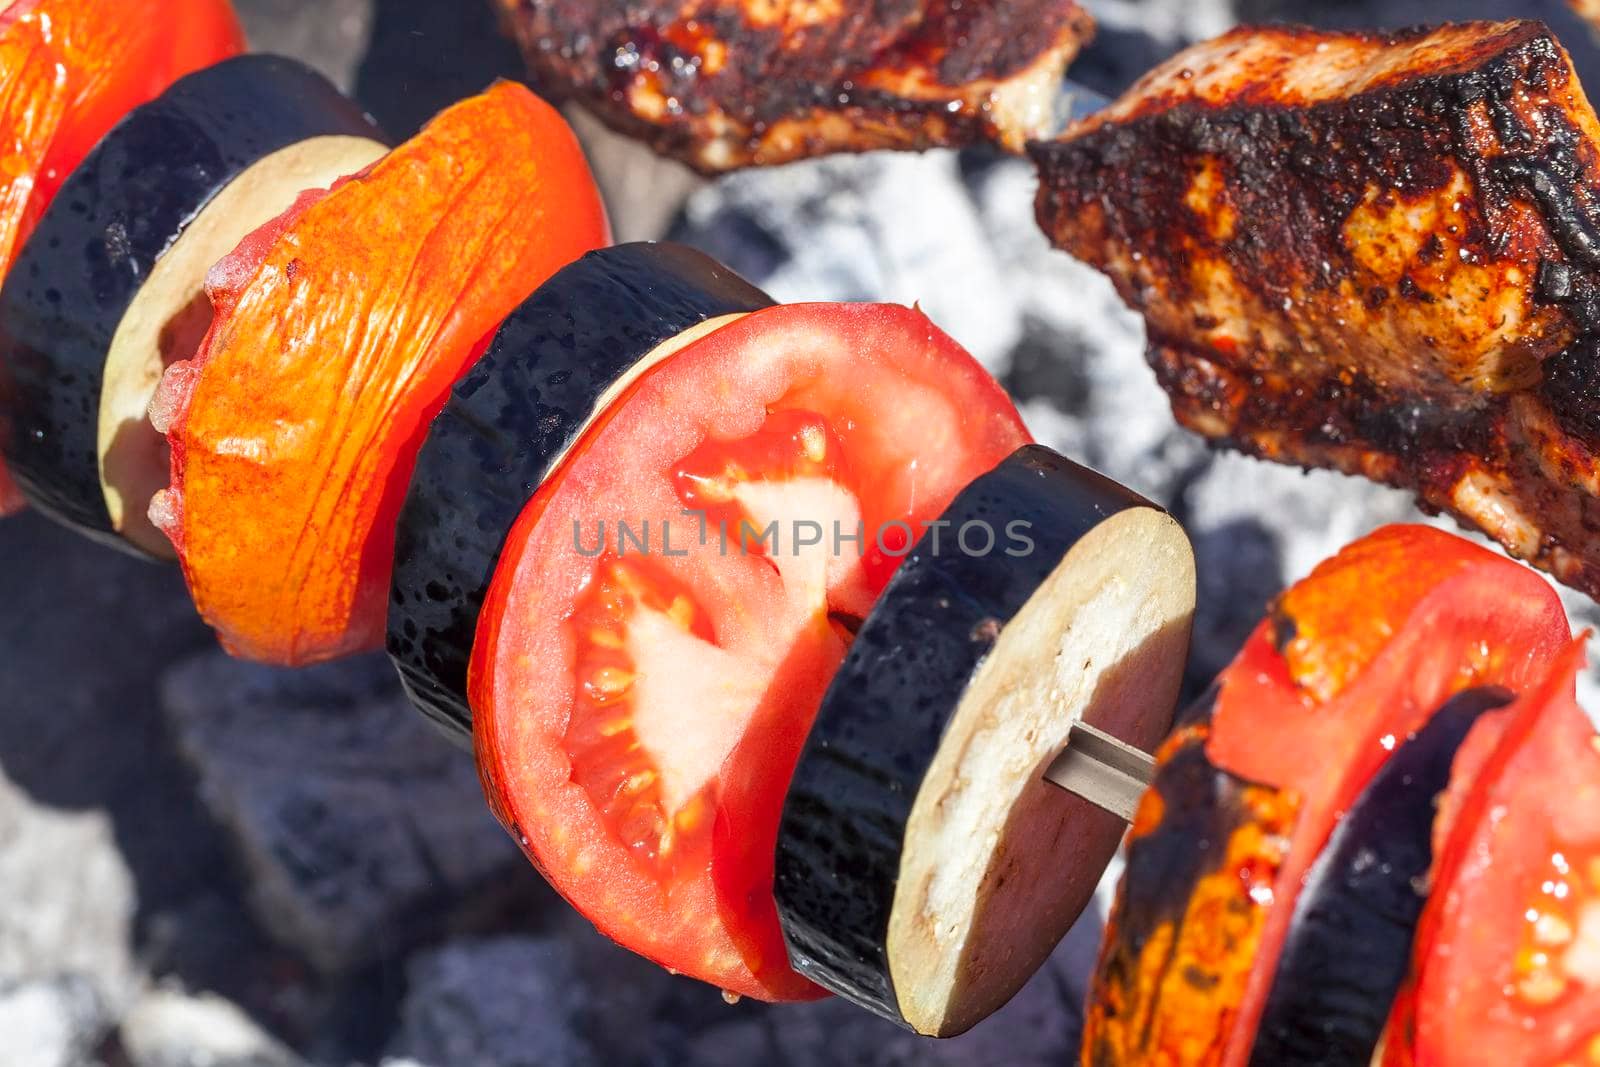 Vegetarian skewer with pieces of eggplant and tomato during cooking on fire, close-up